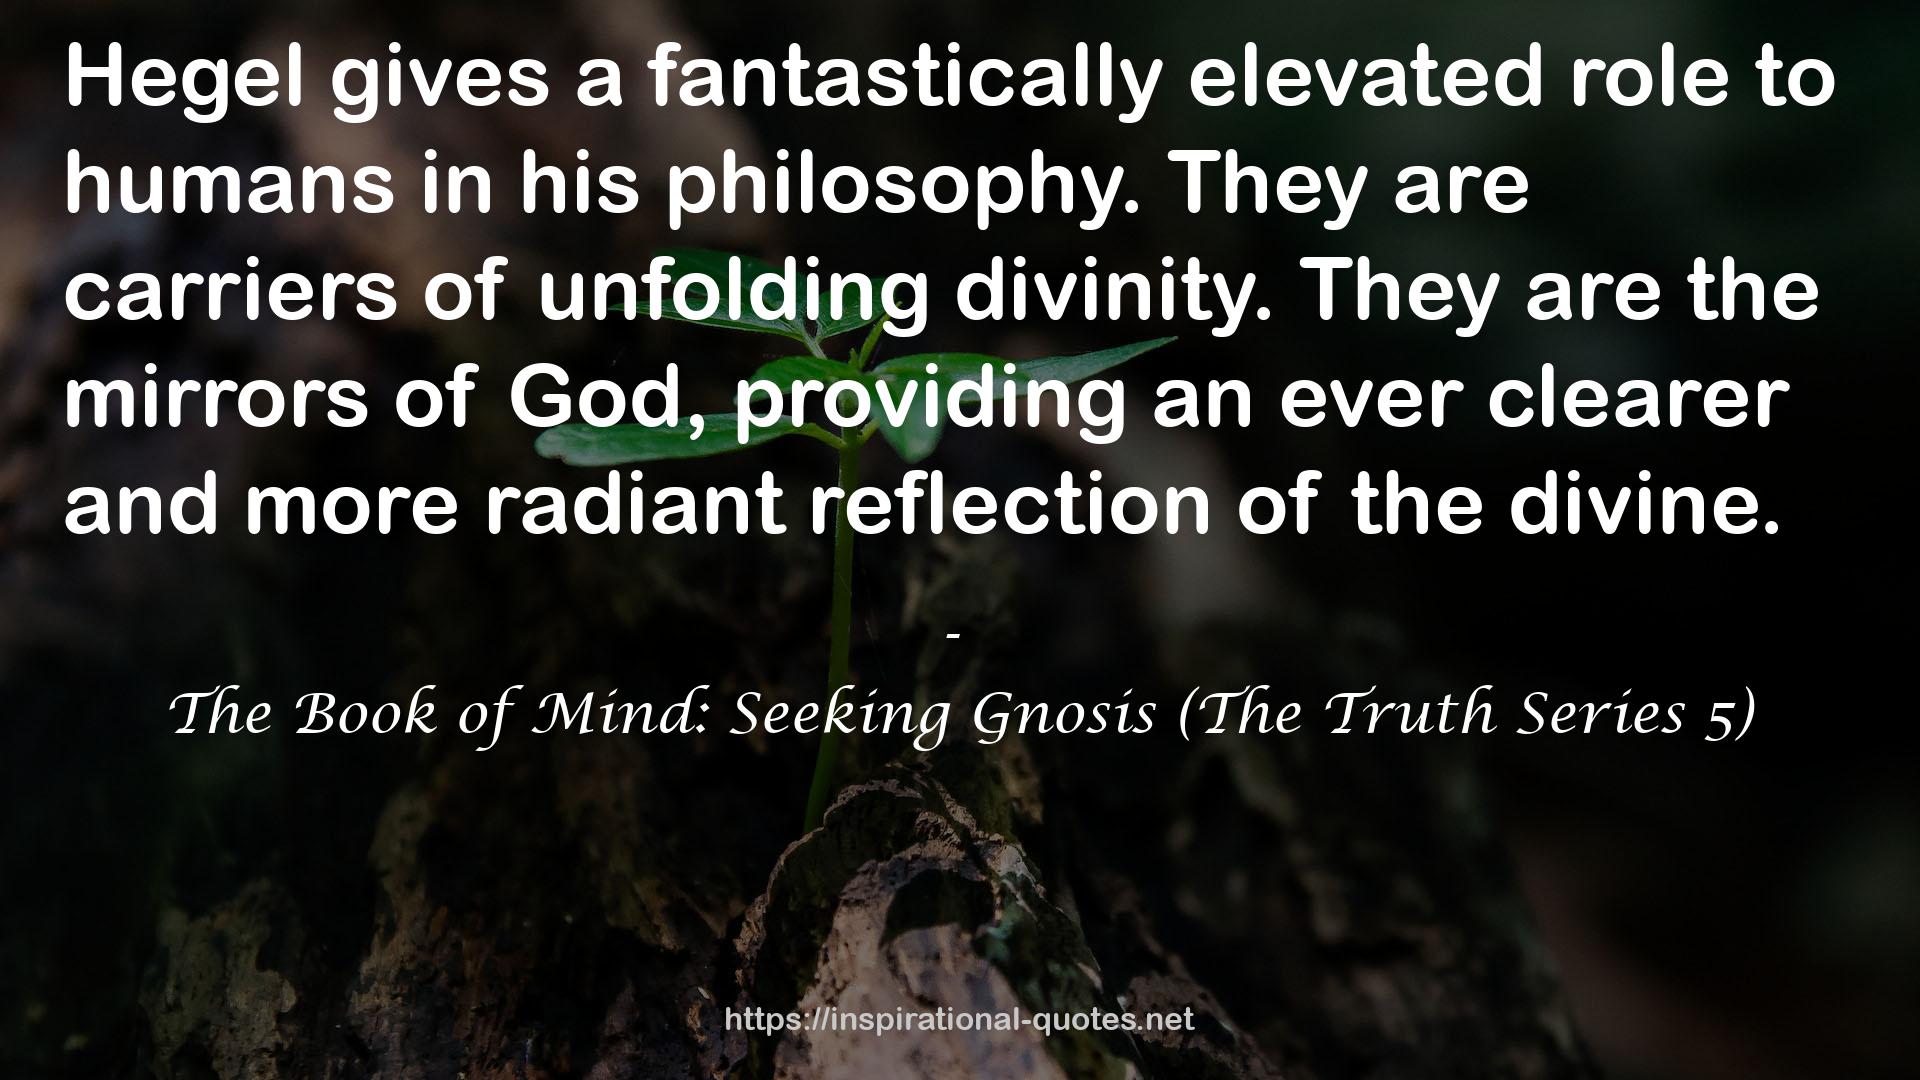 The Book of Mind: Seeking Gnosis (The Truth Series 5) QUOTES